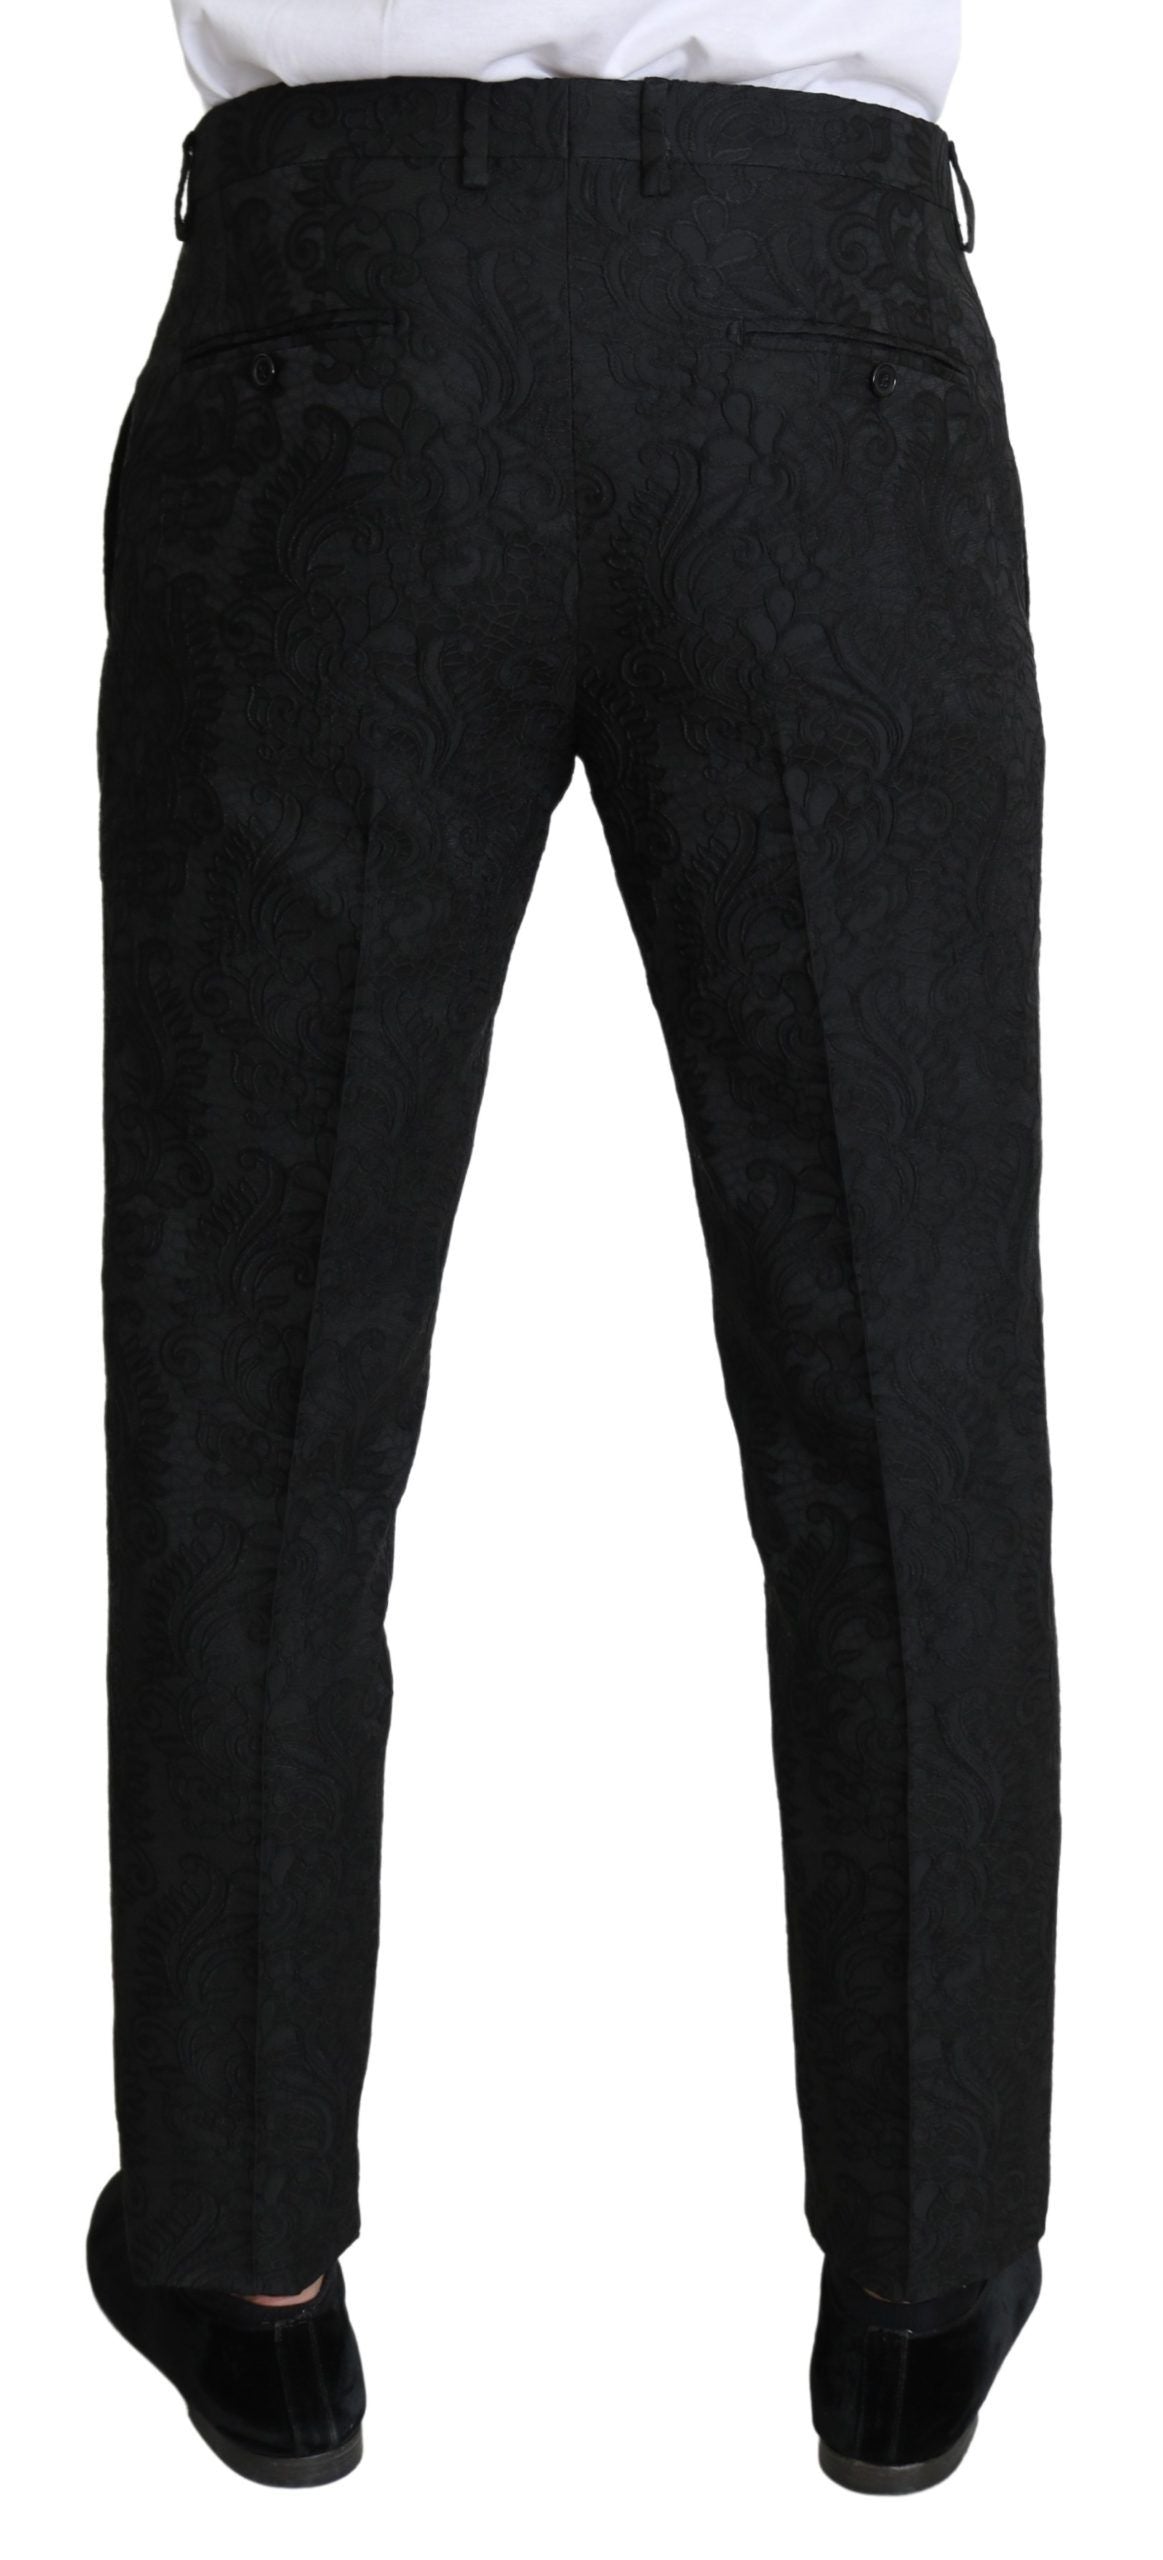 Black Floral Brocade Slim Trouser Pants - Designed by Dolce & Gabbana Available to Buy at a Discounted Price on Moon Behind The Hill Online Designer Discount Store